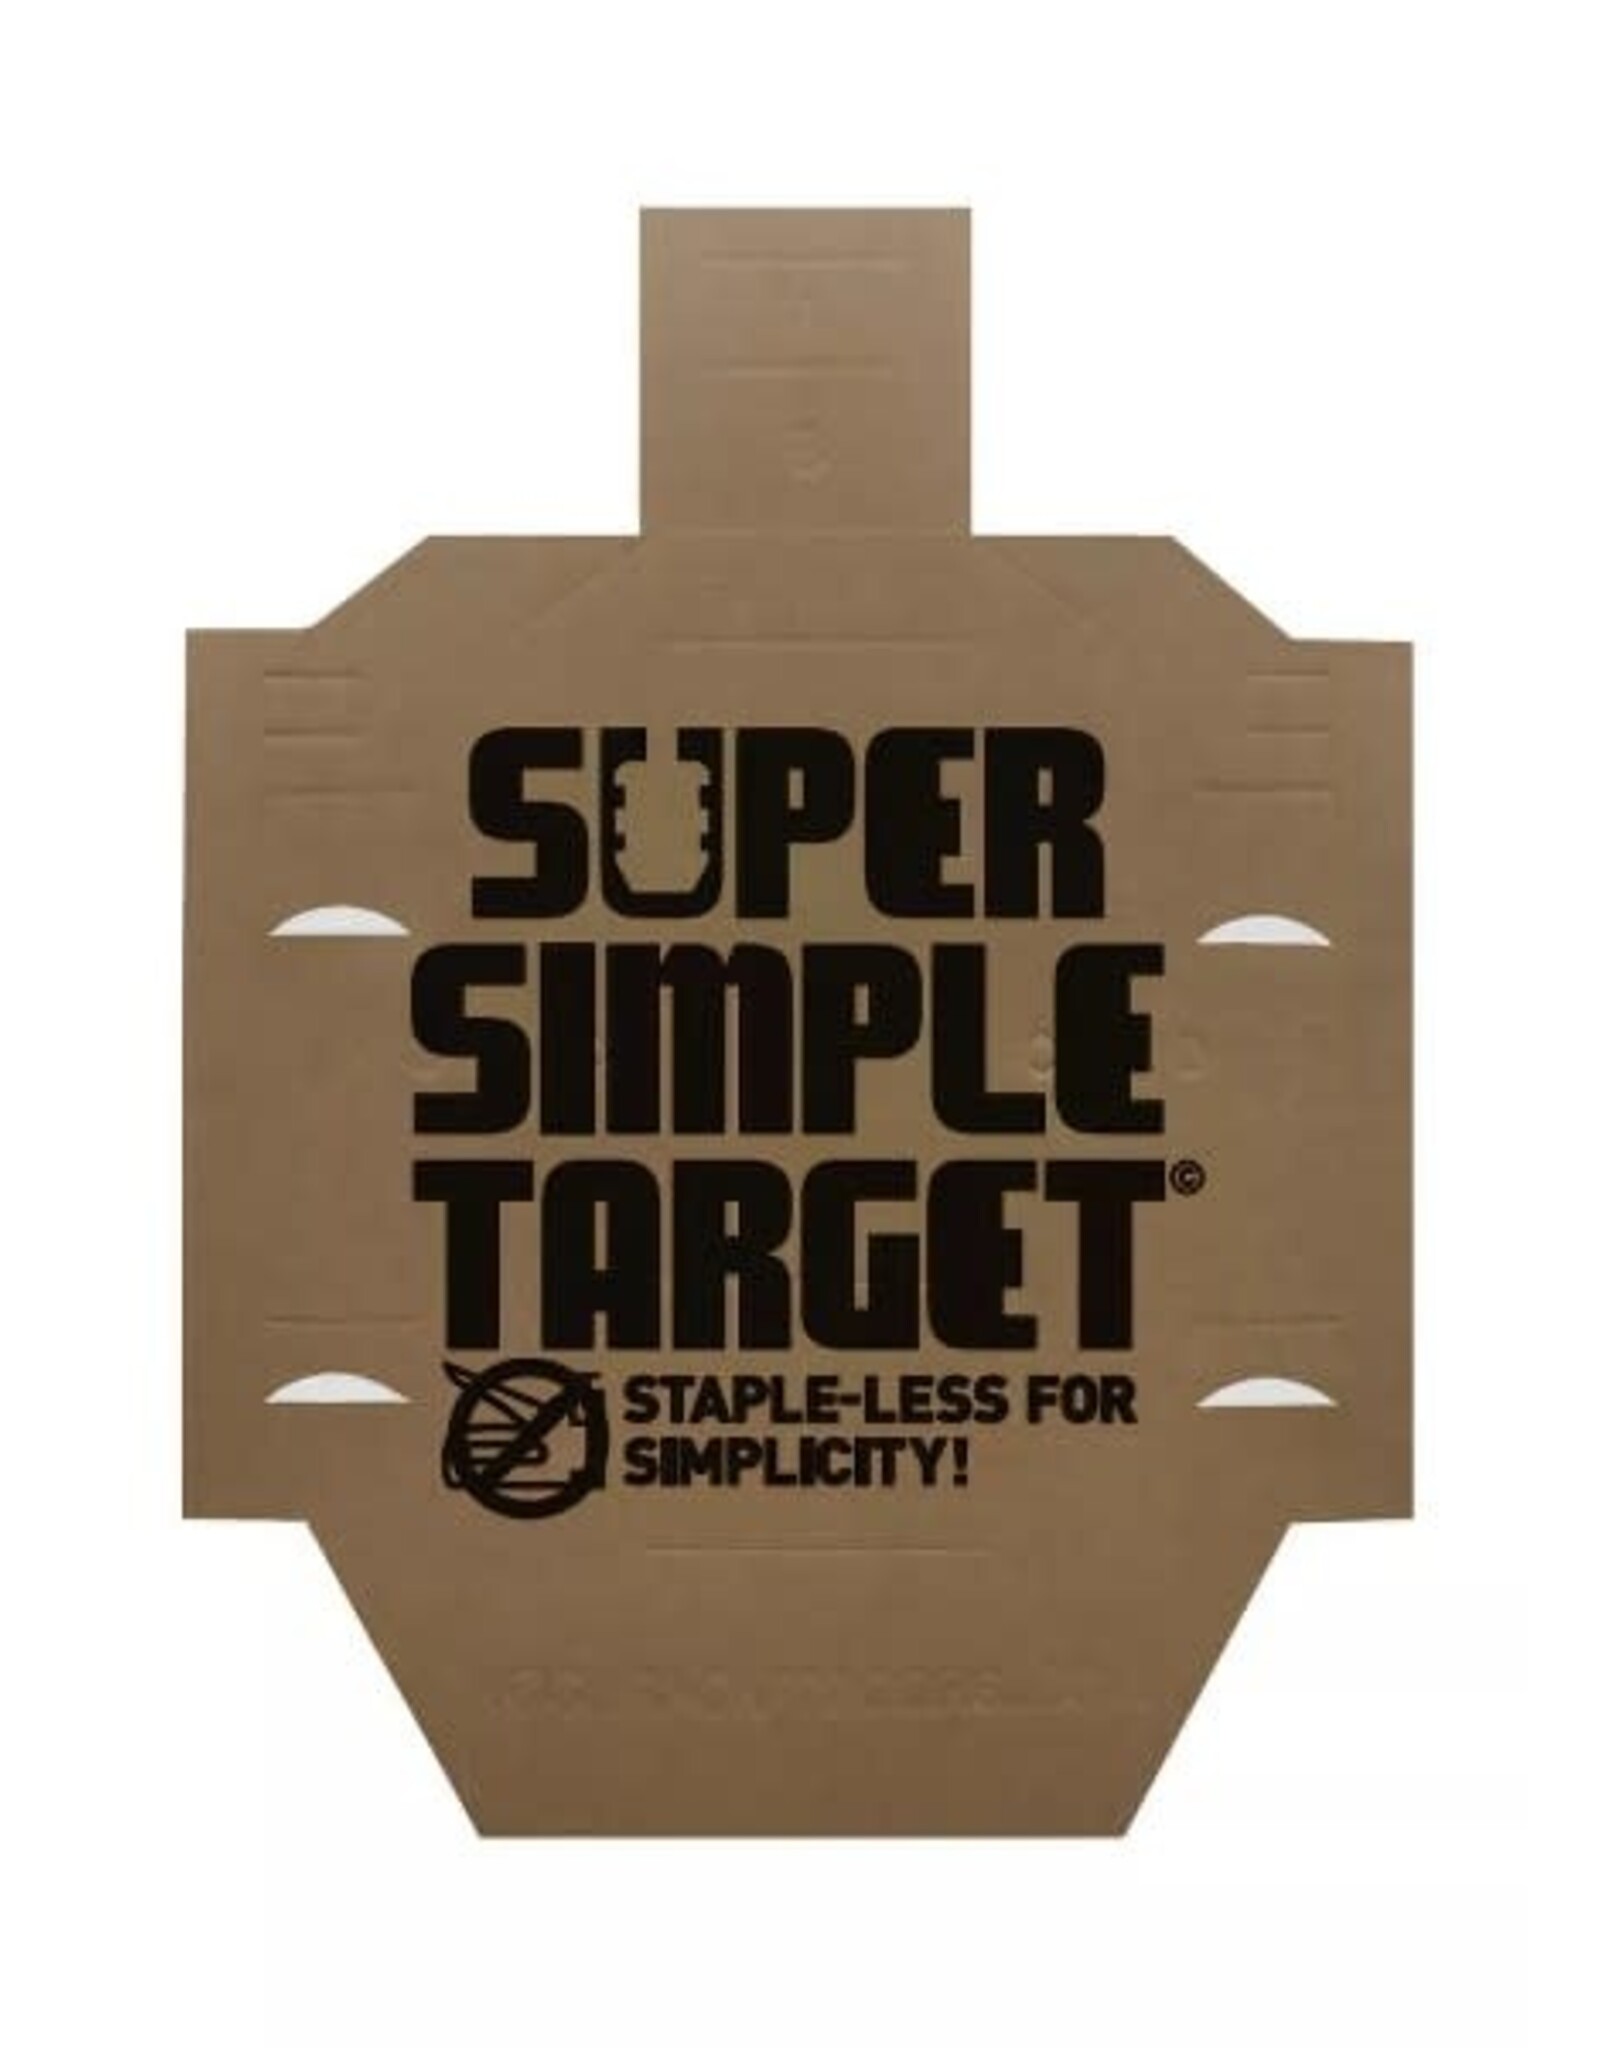 Accura Outdoors "Super Simple Target" - Single